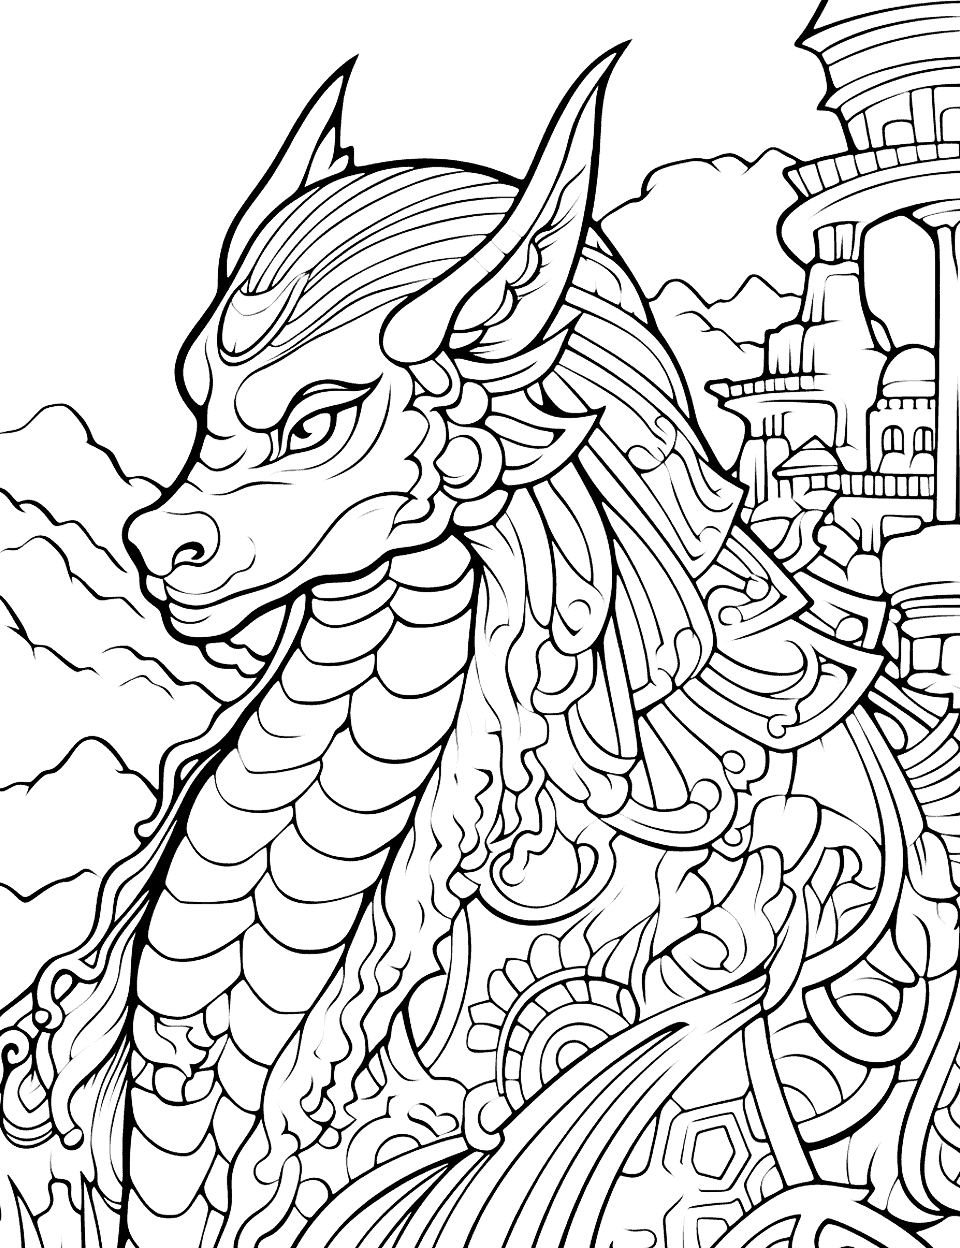 Mythical Dragons Adult Coloring Page - A challenging coloring page featuring a mythical dragon with intricate scales for a detailed coloring experience.